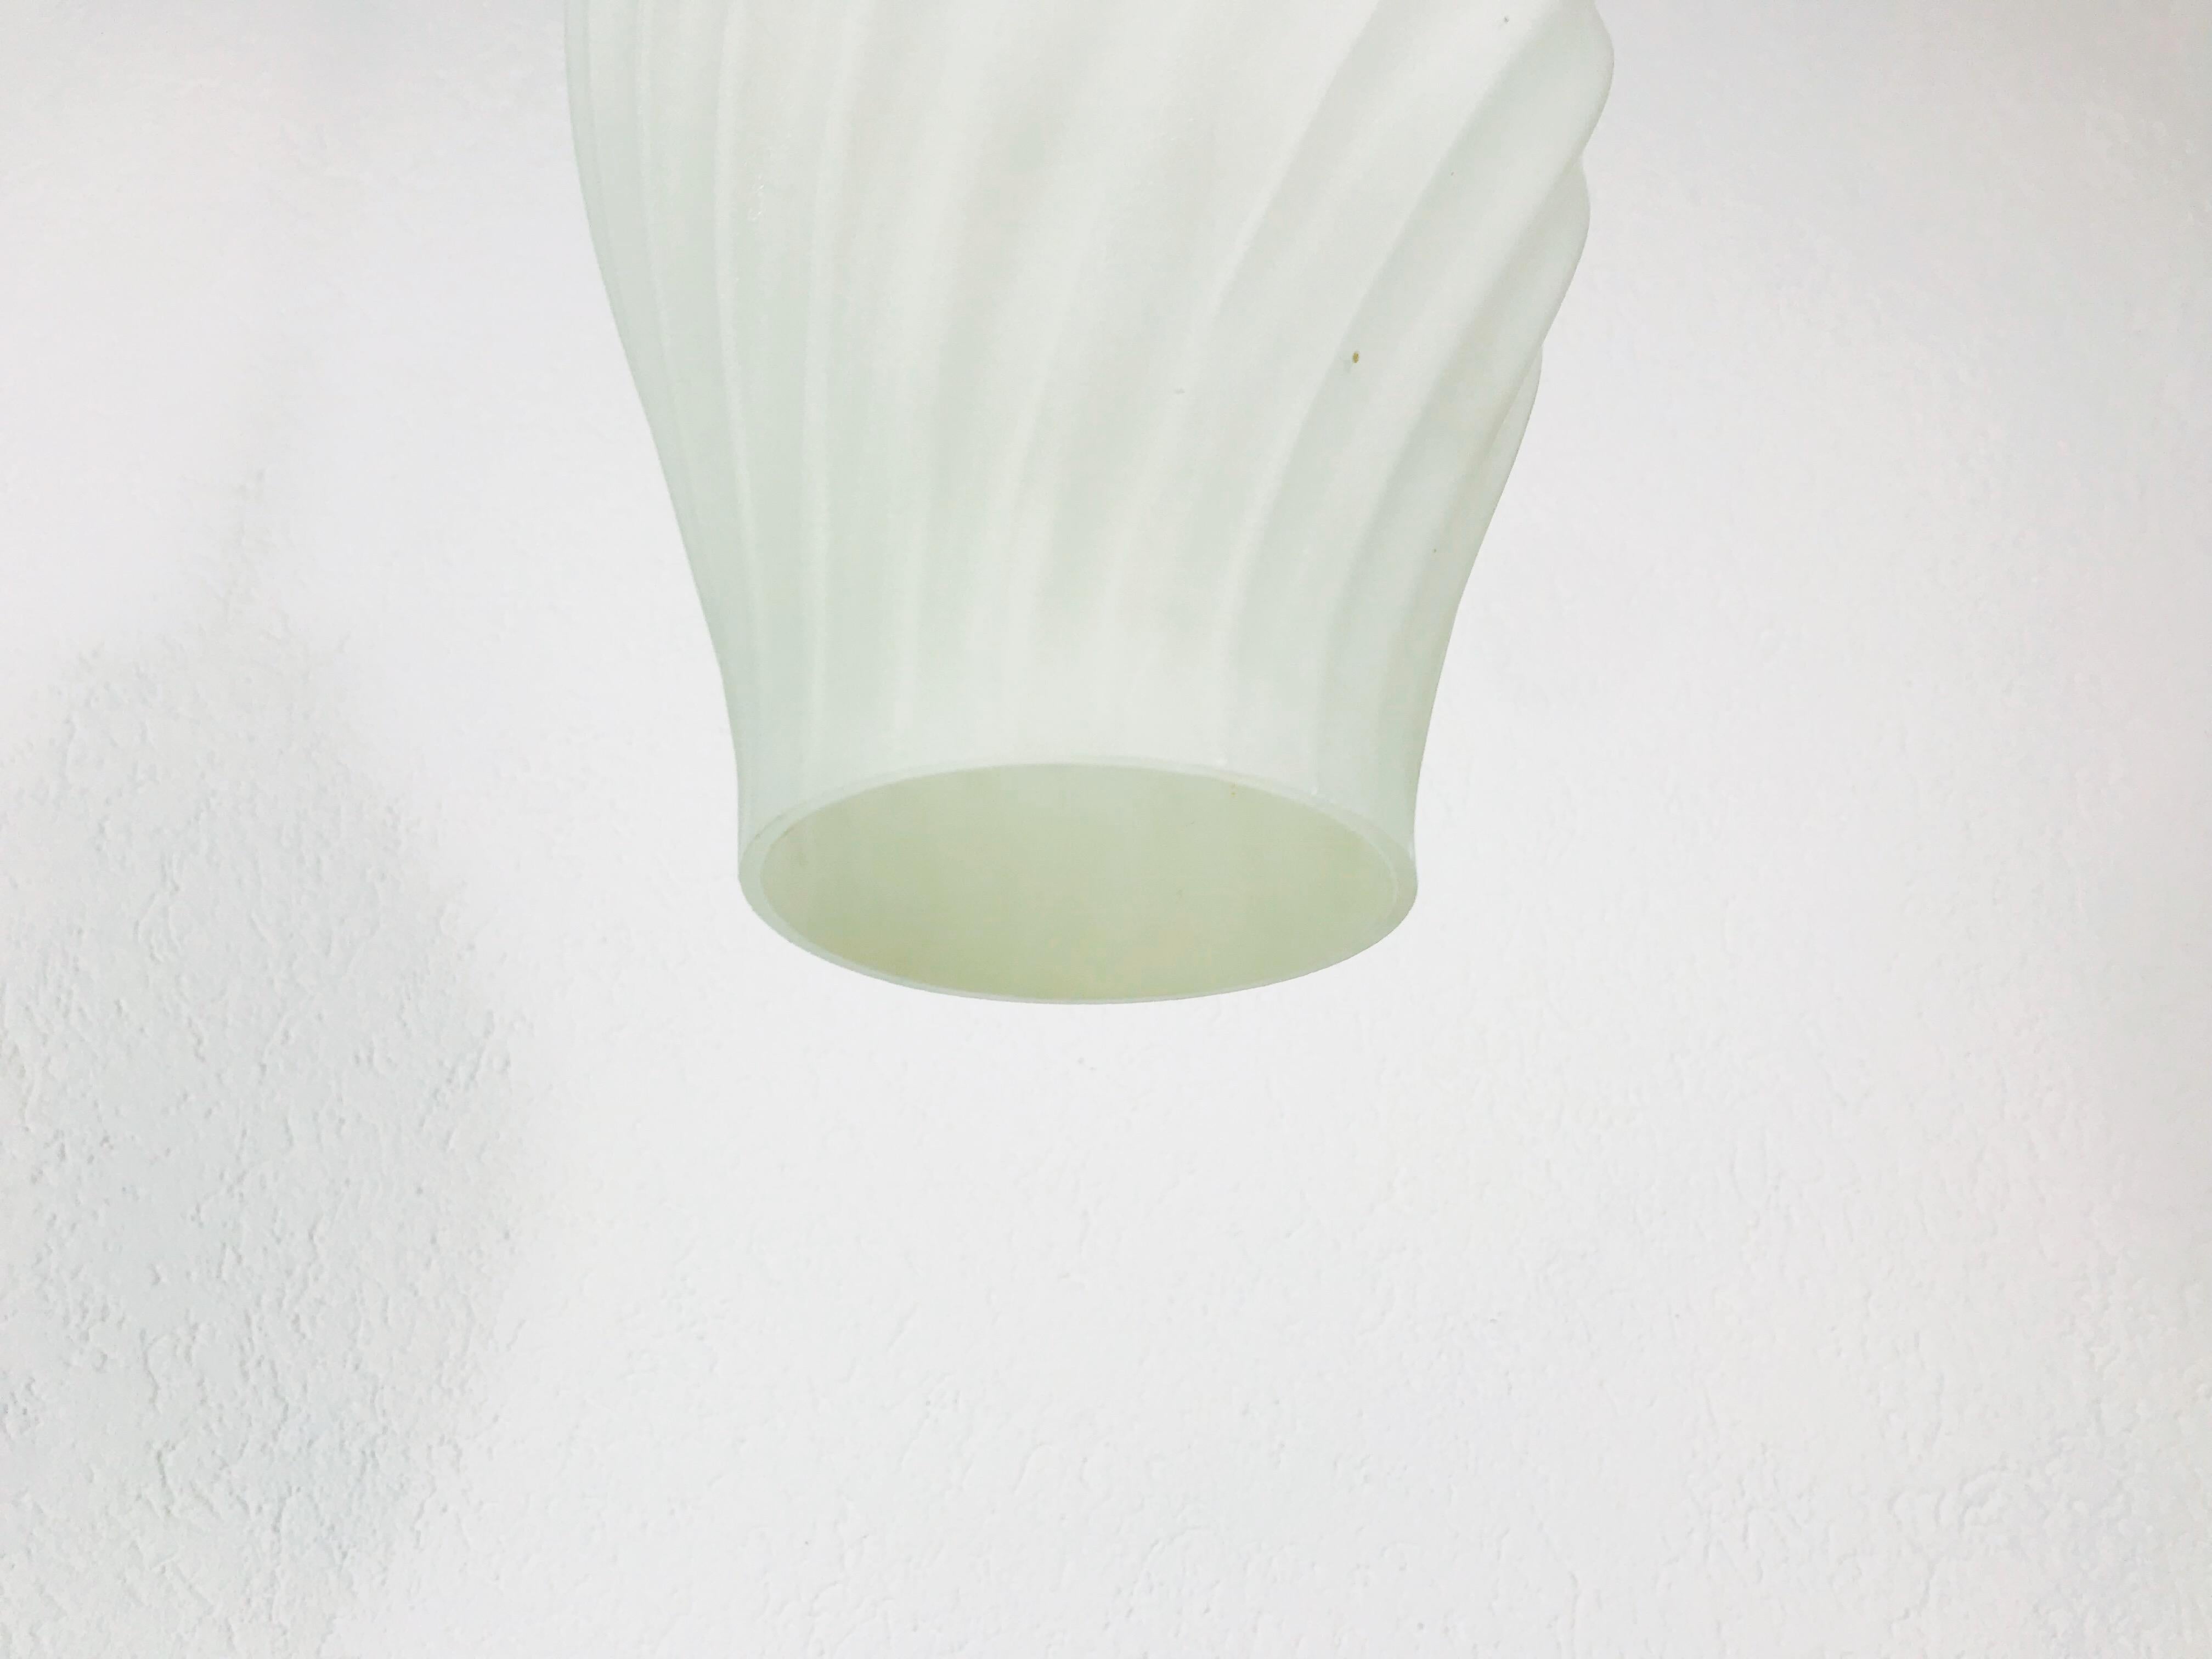 A teak and white opaline glass made in the 1960s. The glass shade is made of thin opaline glass and has an octagonal shape. The top of the lamp is teak. The lamp has a Scandinavian design.

The light requires an E27 light bulb.